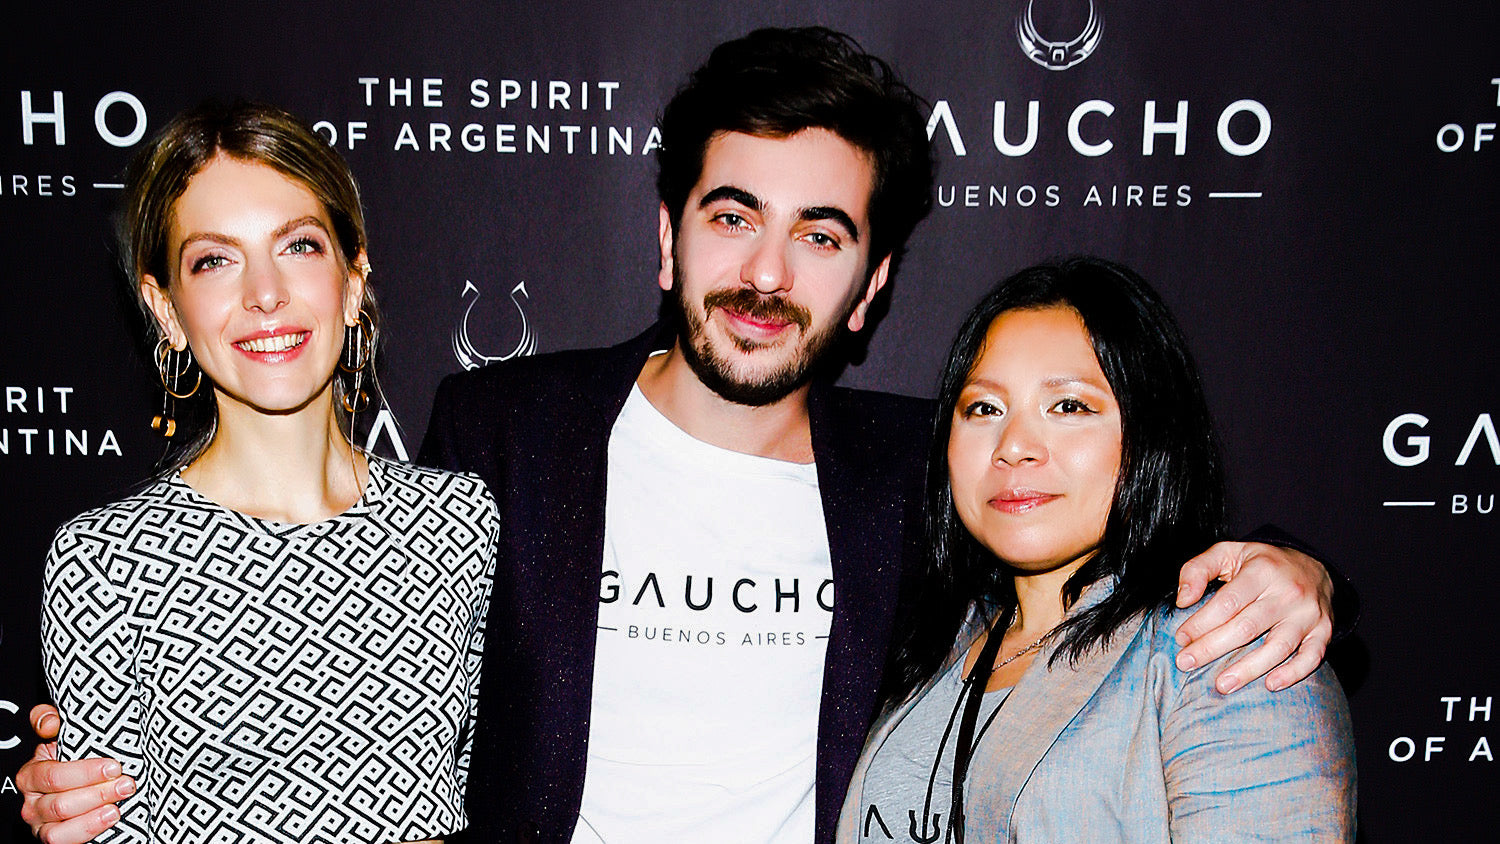 PICTURED FROM LEFT TO RIGHT: GAUCHO - BUENOS AIRES DESIGNERS CARMEN VILS, GUIDO SPANGENBERG, AND ERICA SORIANO